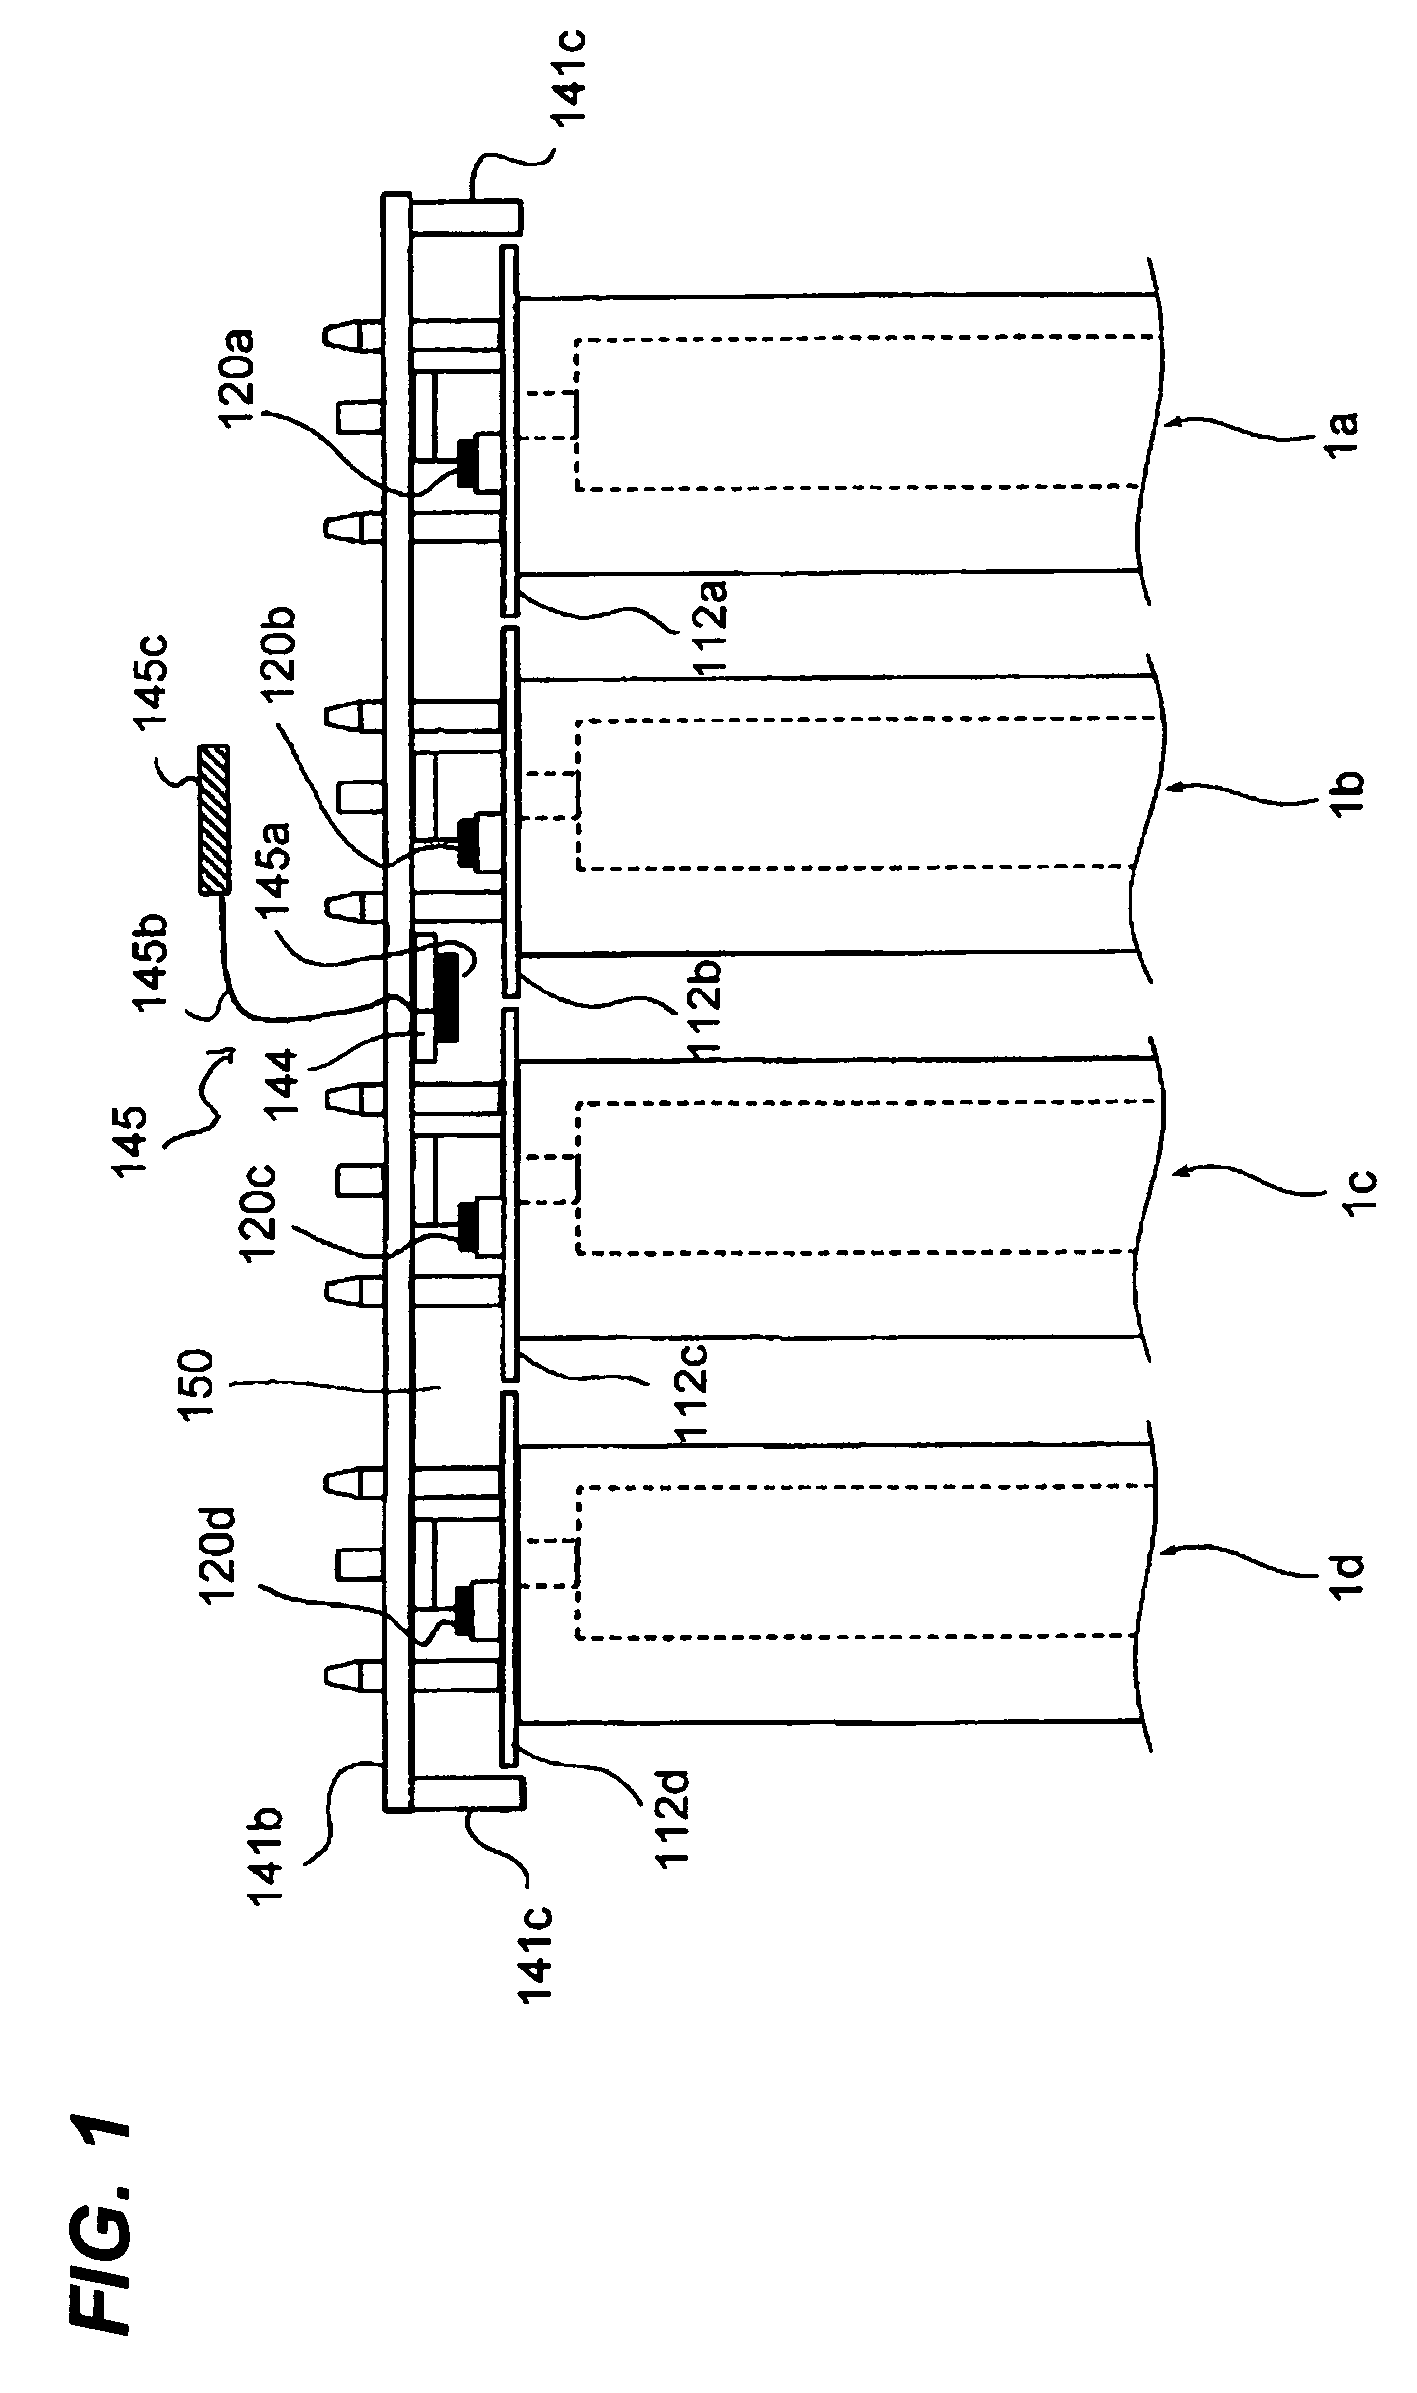 Image forming apparatus having shielded area in which non-contact wireless communication occurs